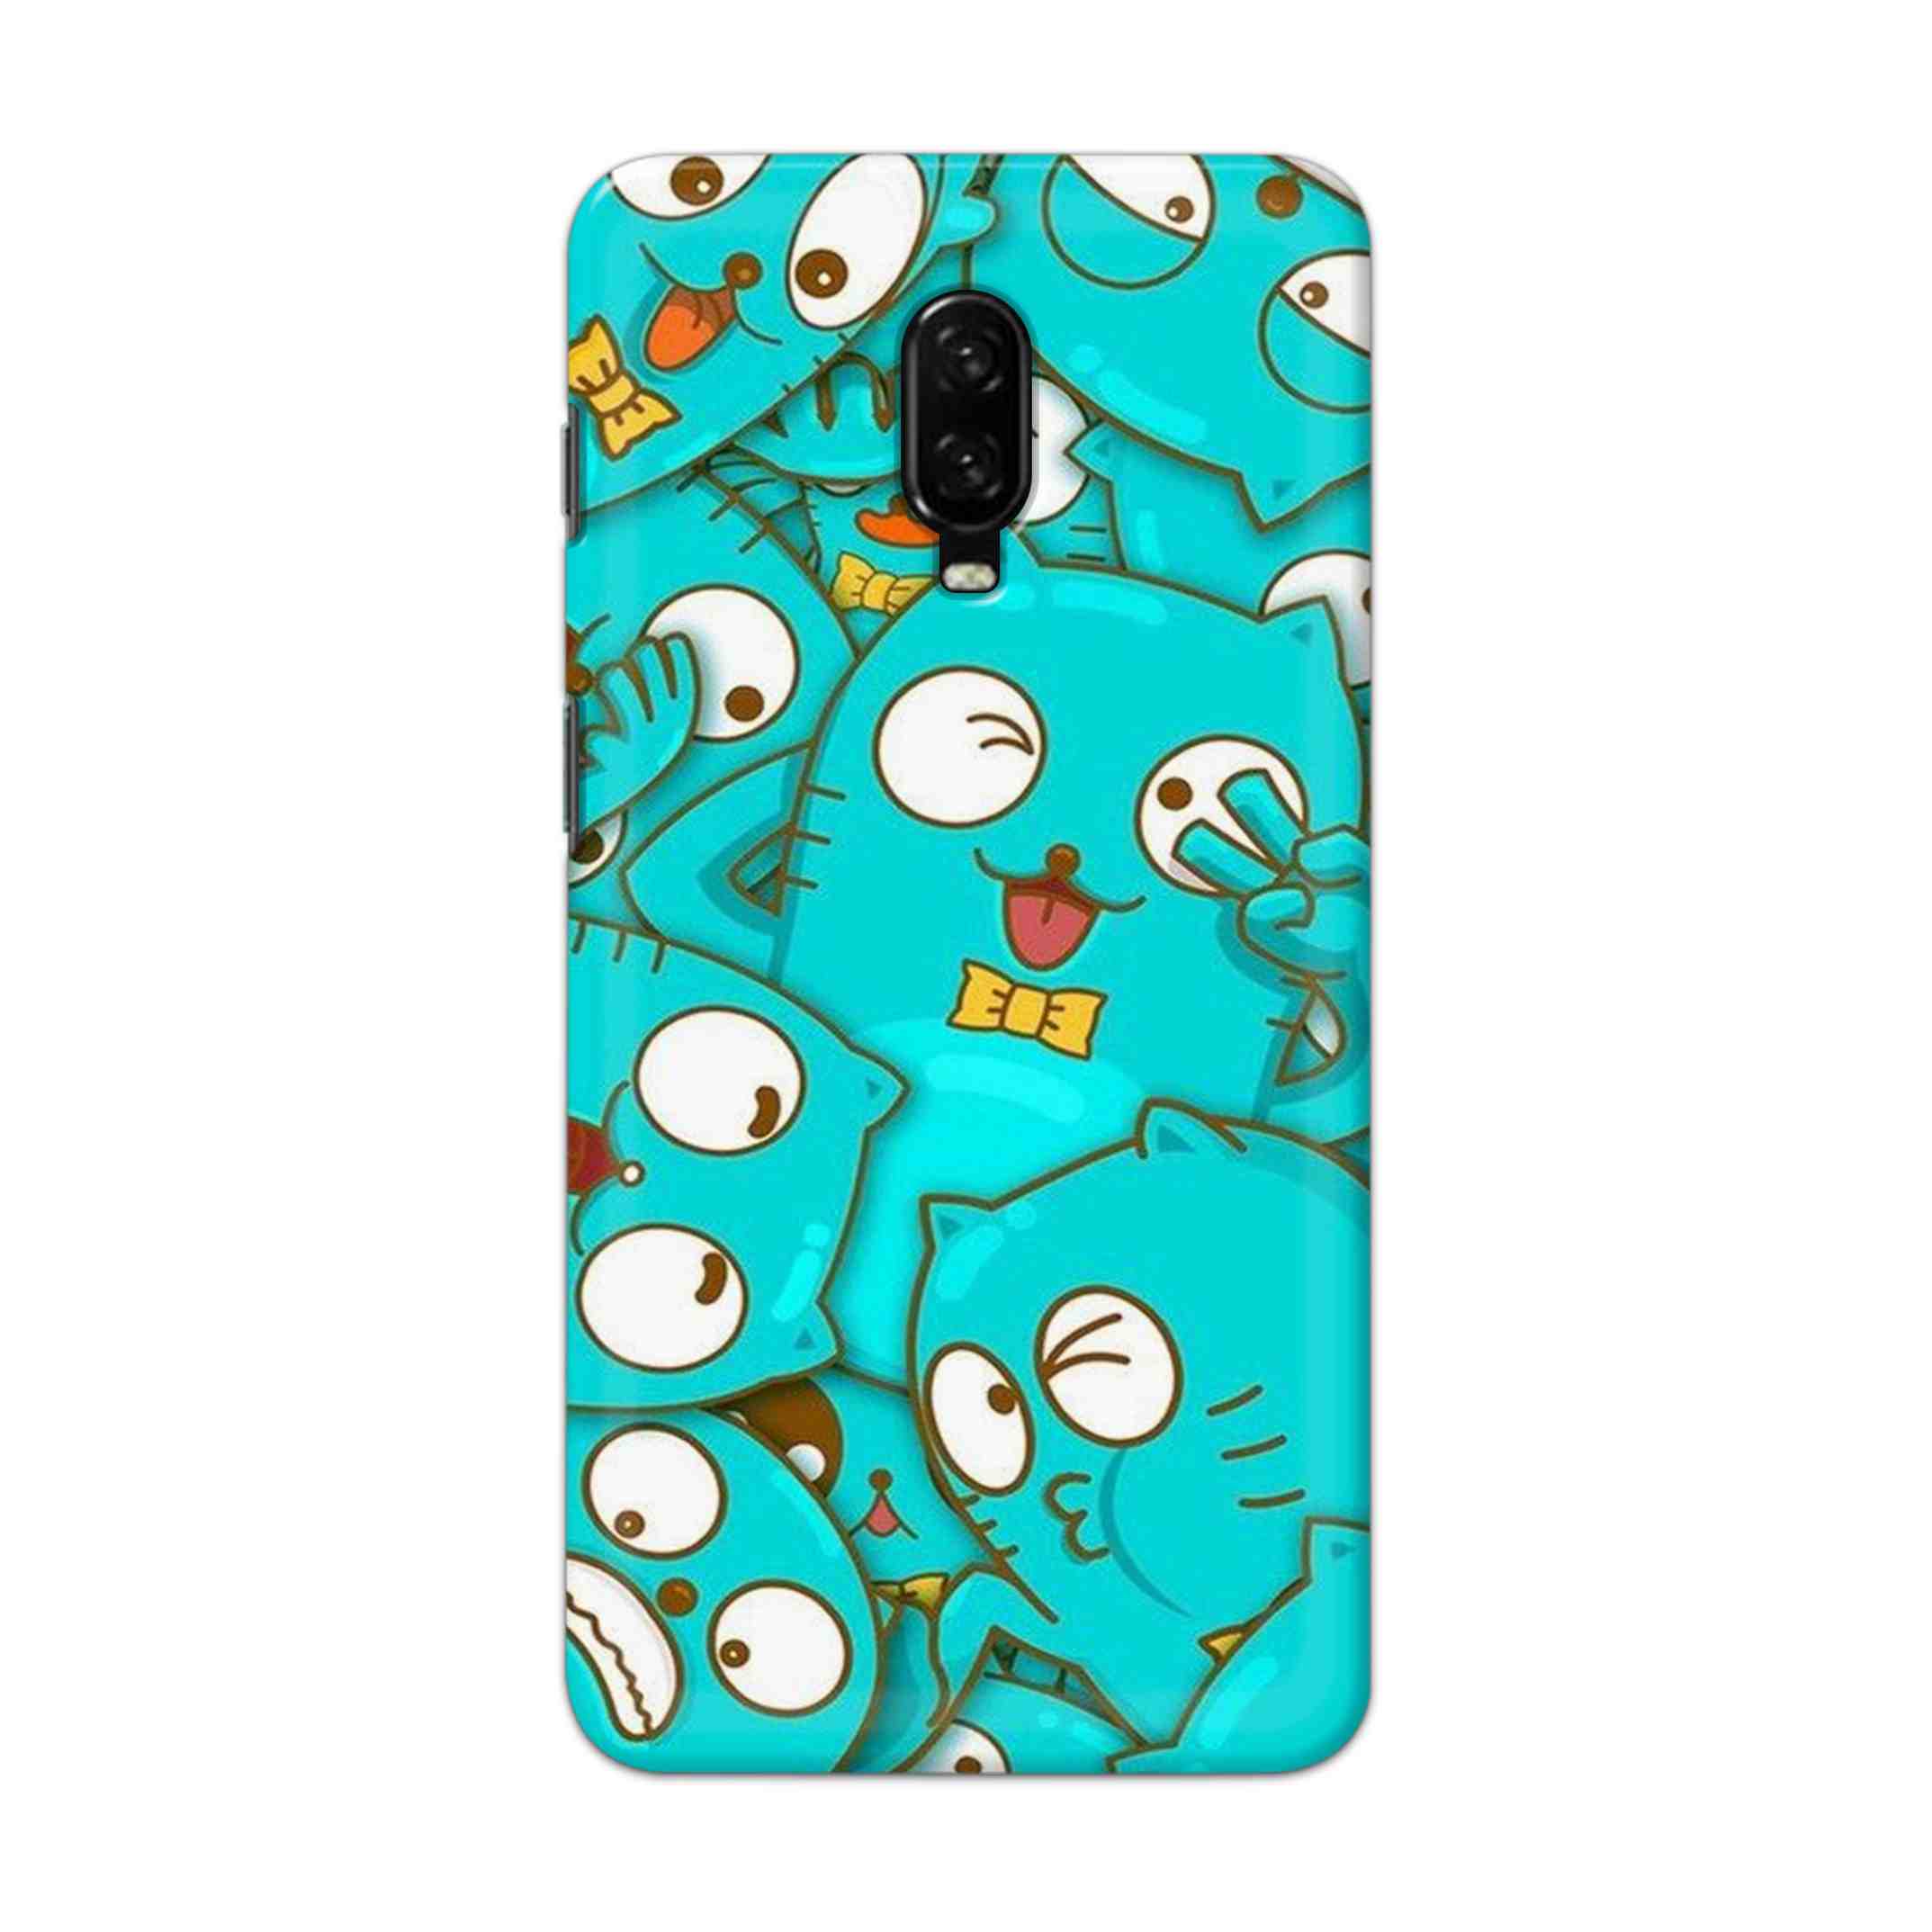 Buy Cat Hard Back Mobile Phone Case Cover For OnePlus 6T Online